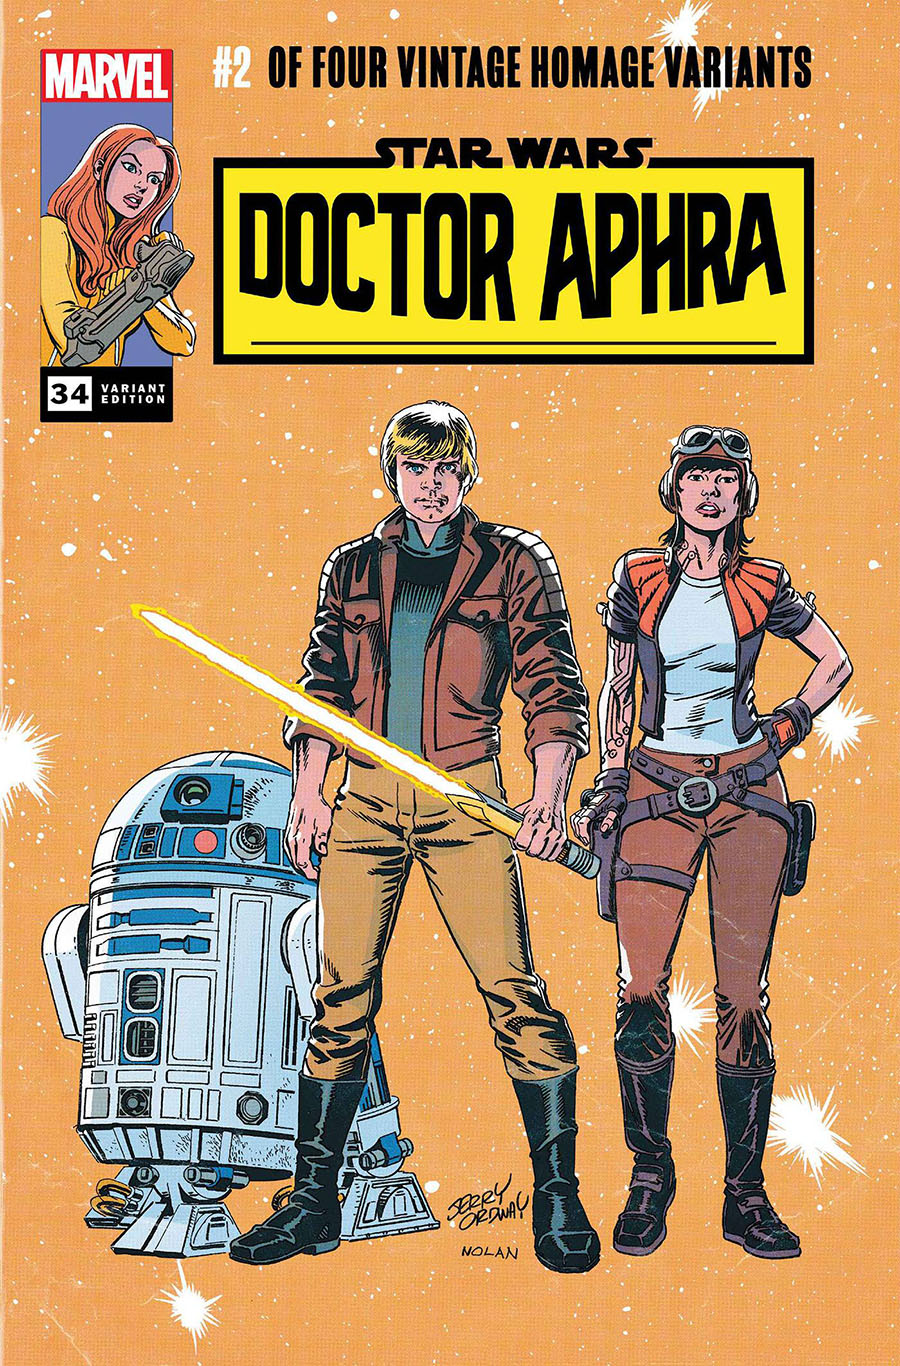 Star Wars Doctor Aphra Vol 2 #34 Cover C Variant Jerry Ordway Classic Trade Dress Cover